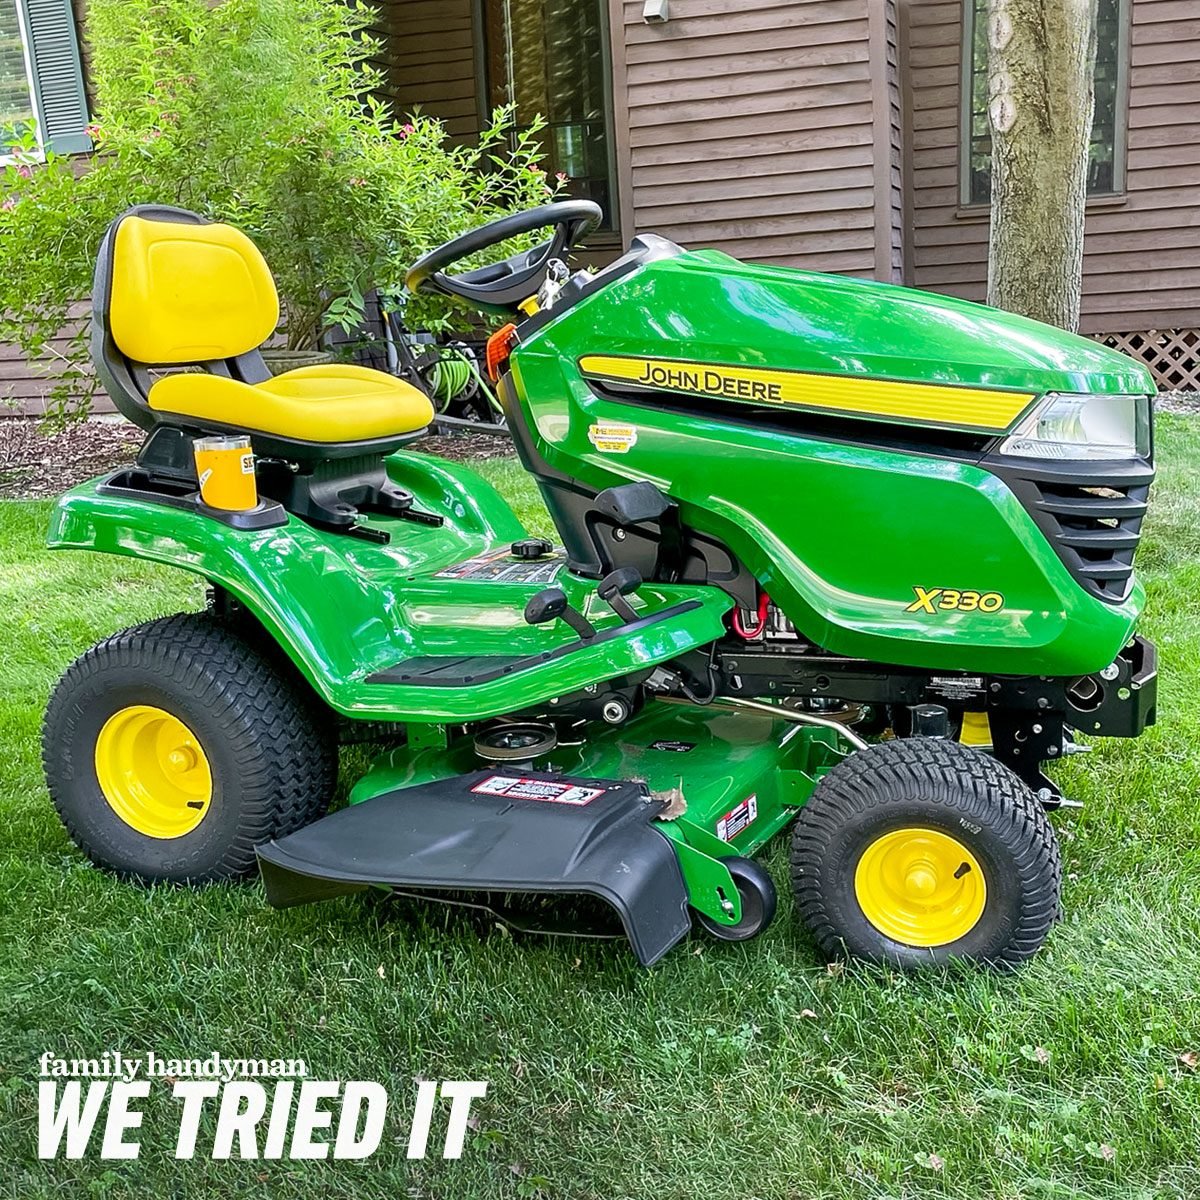 Our Turf Expert Tested the John Deere Riding Lawn Tractor and Here's Our Verdict